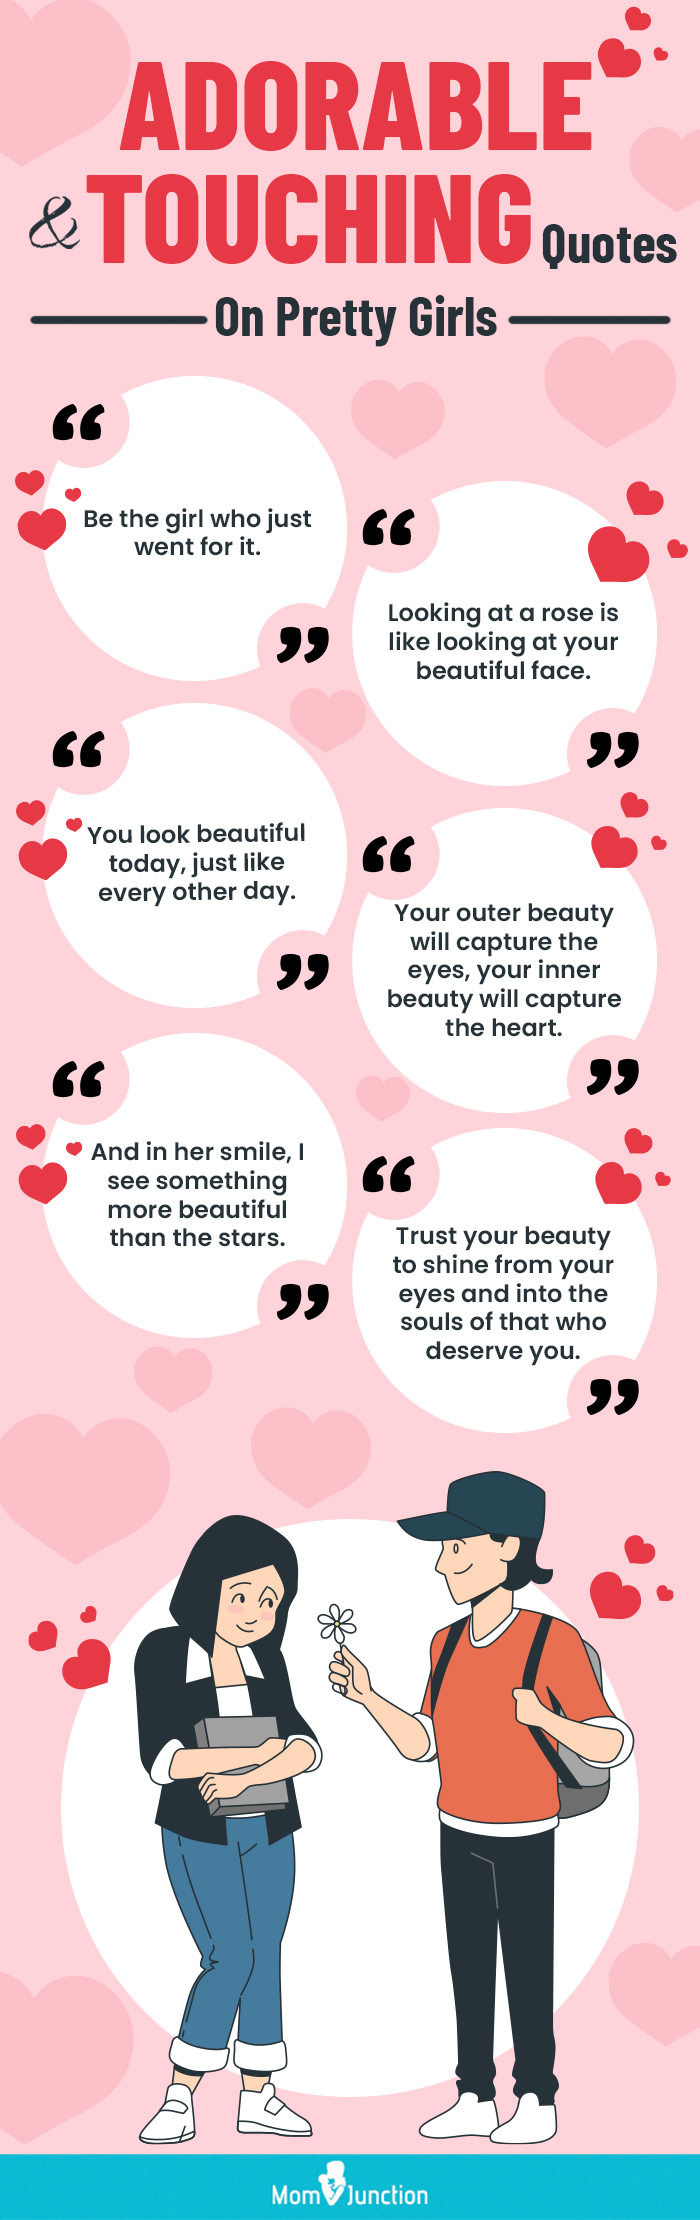 pretty girl quotes [infographic]